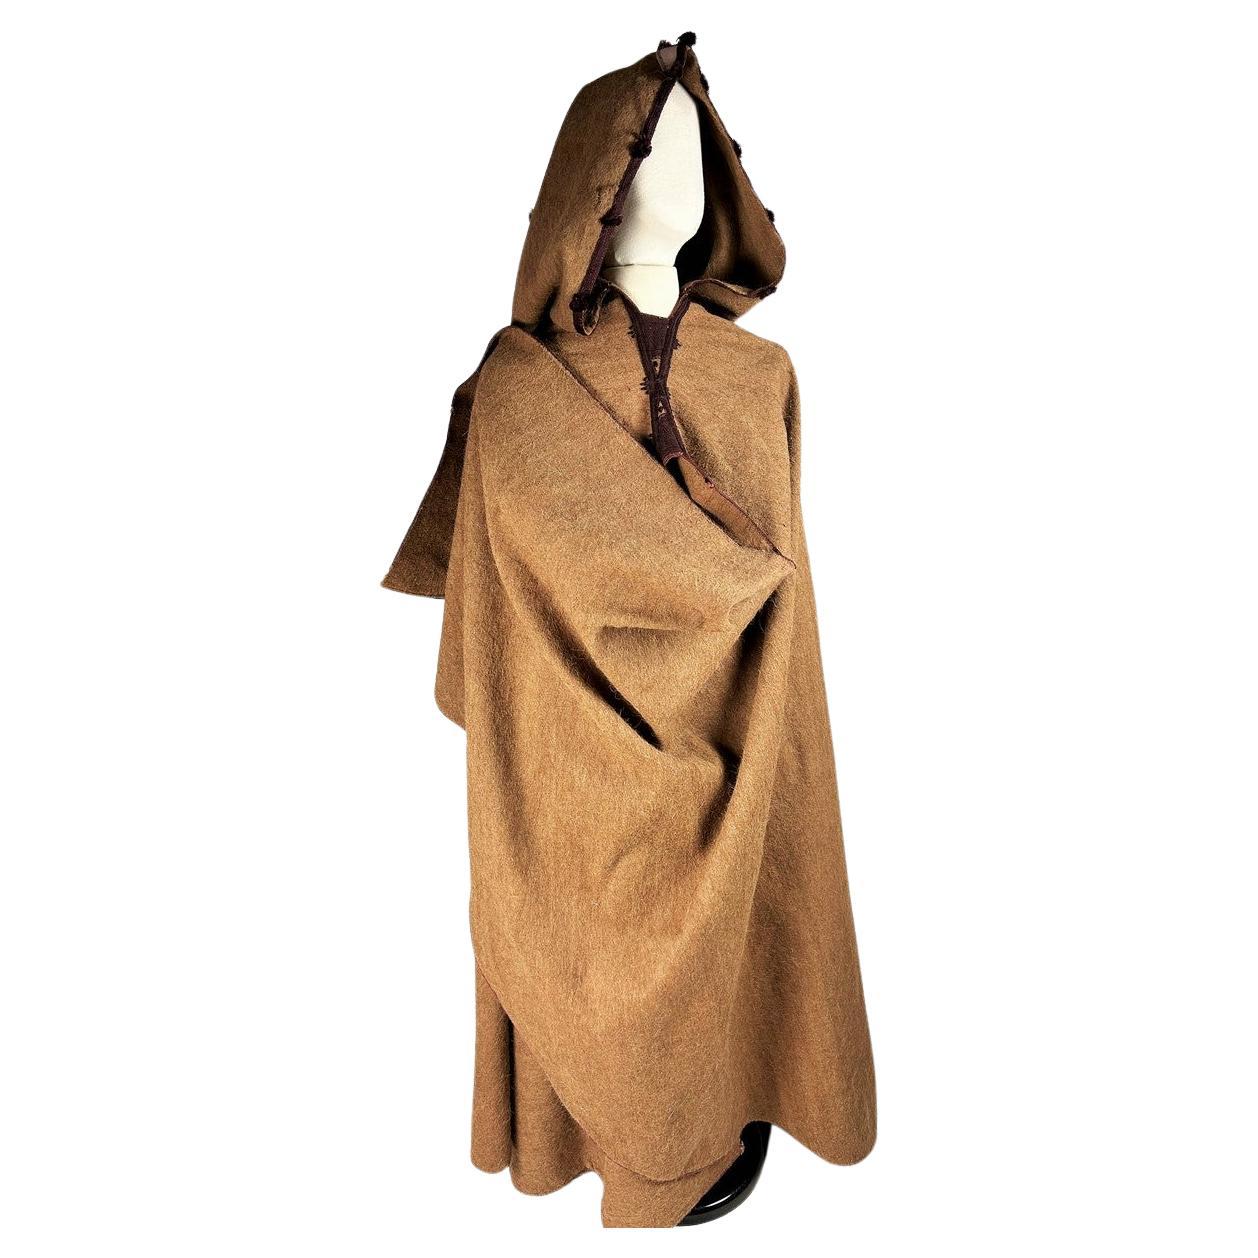 What is a camel overcoat?